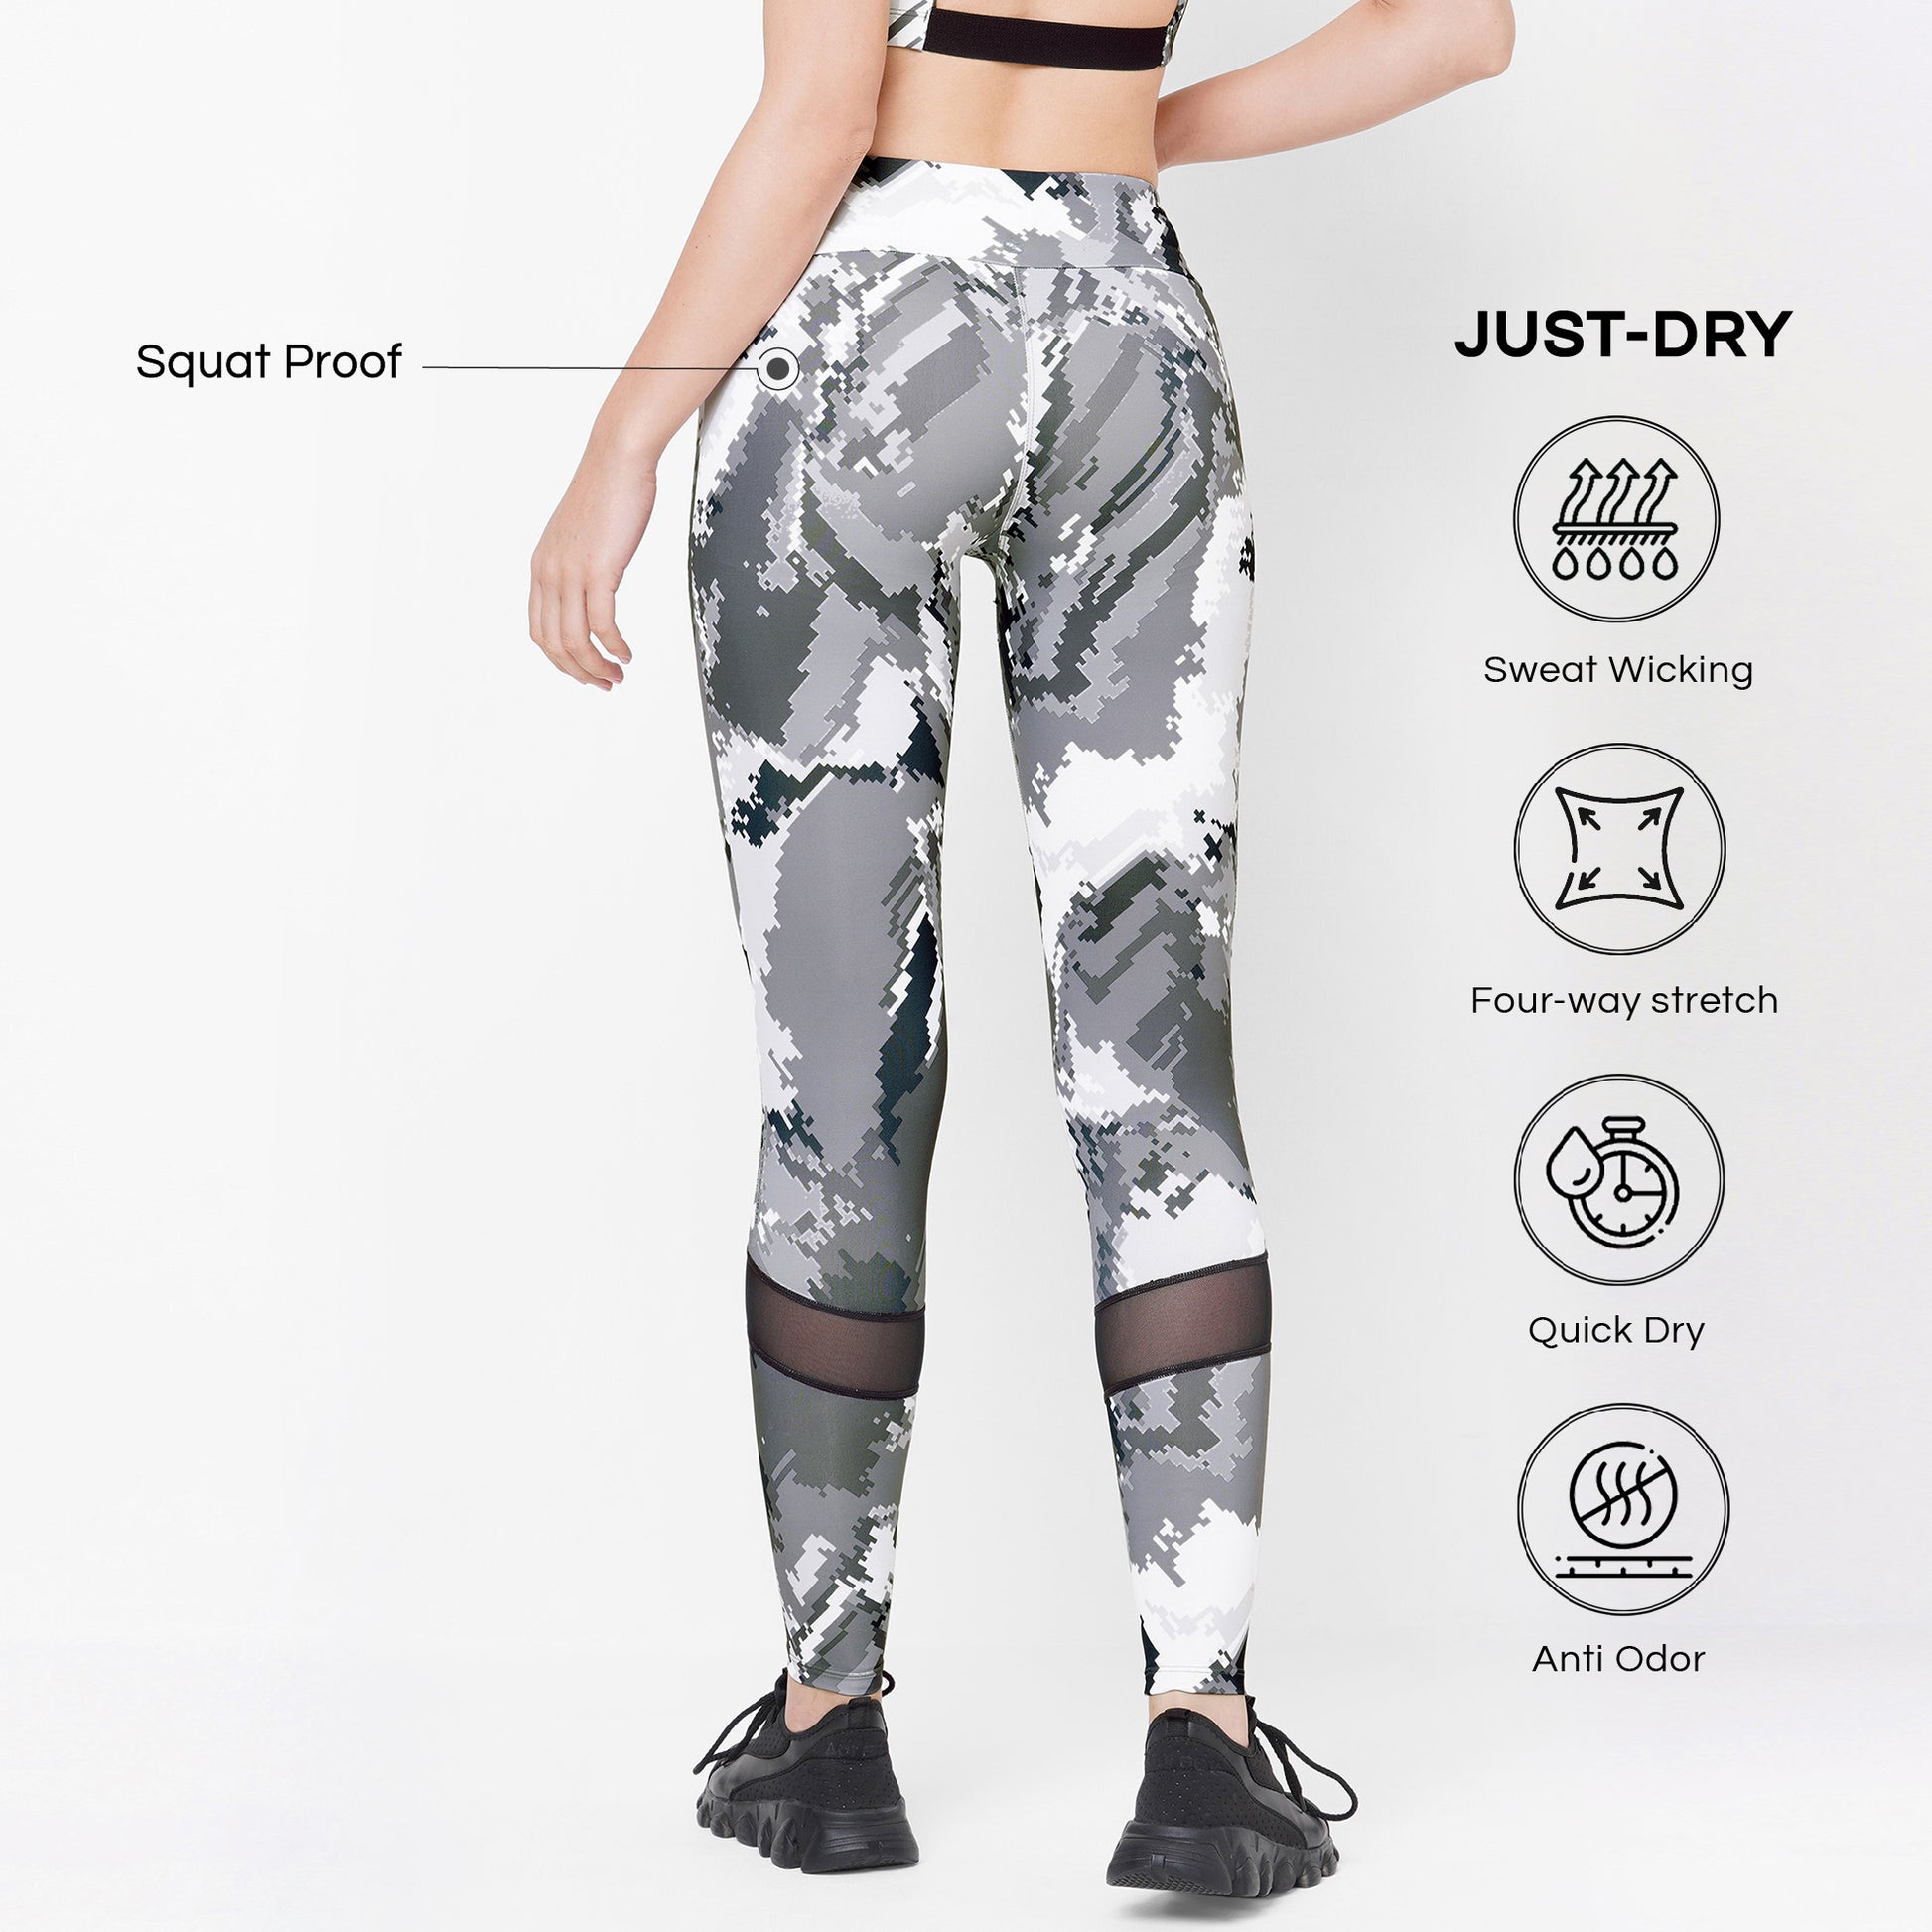 JUST-DRY SEA SALT GREEN 3/4 CAMO PRINTED MESH WORKOUT, 50% OFF